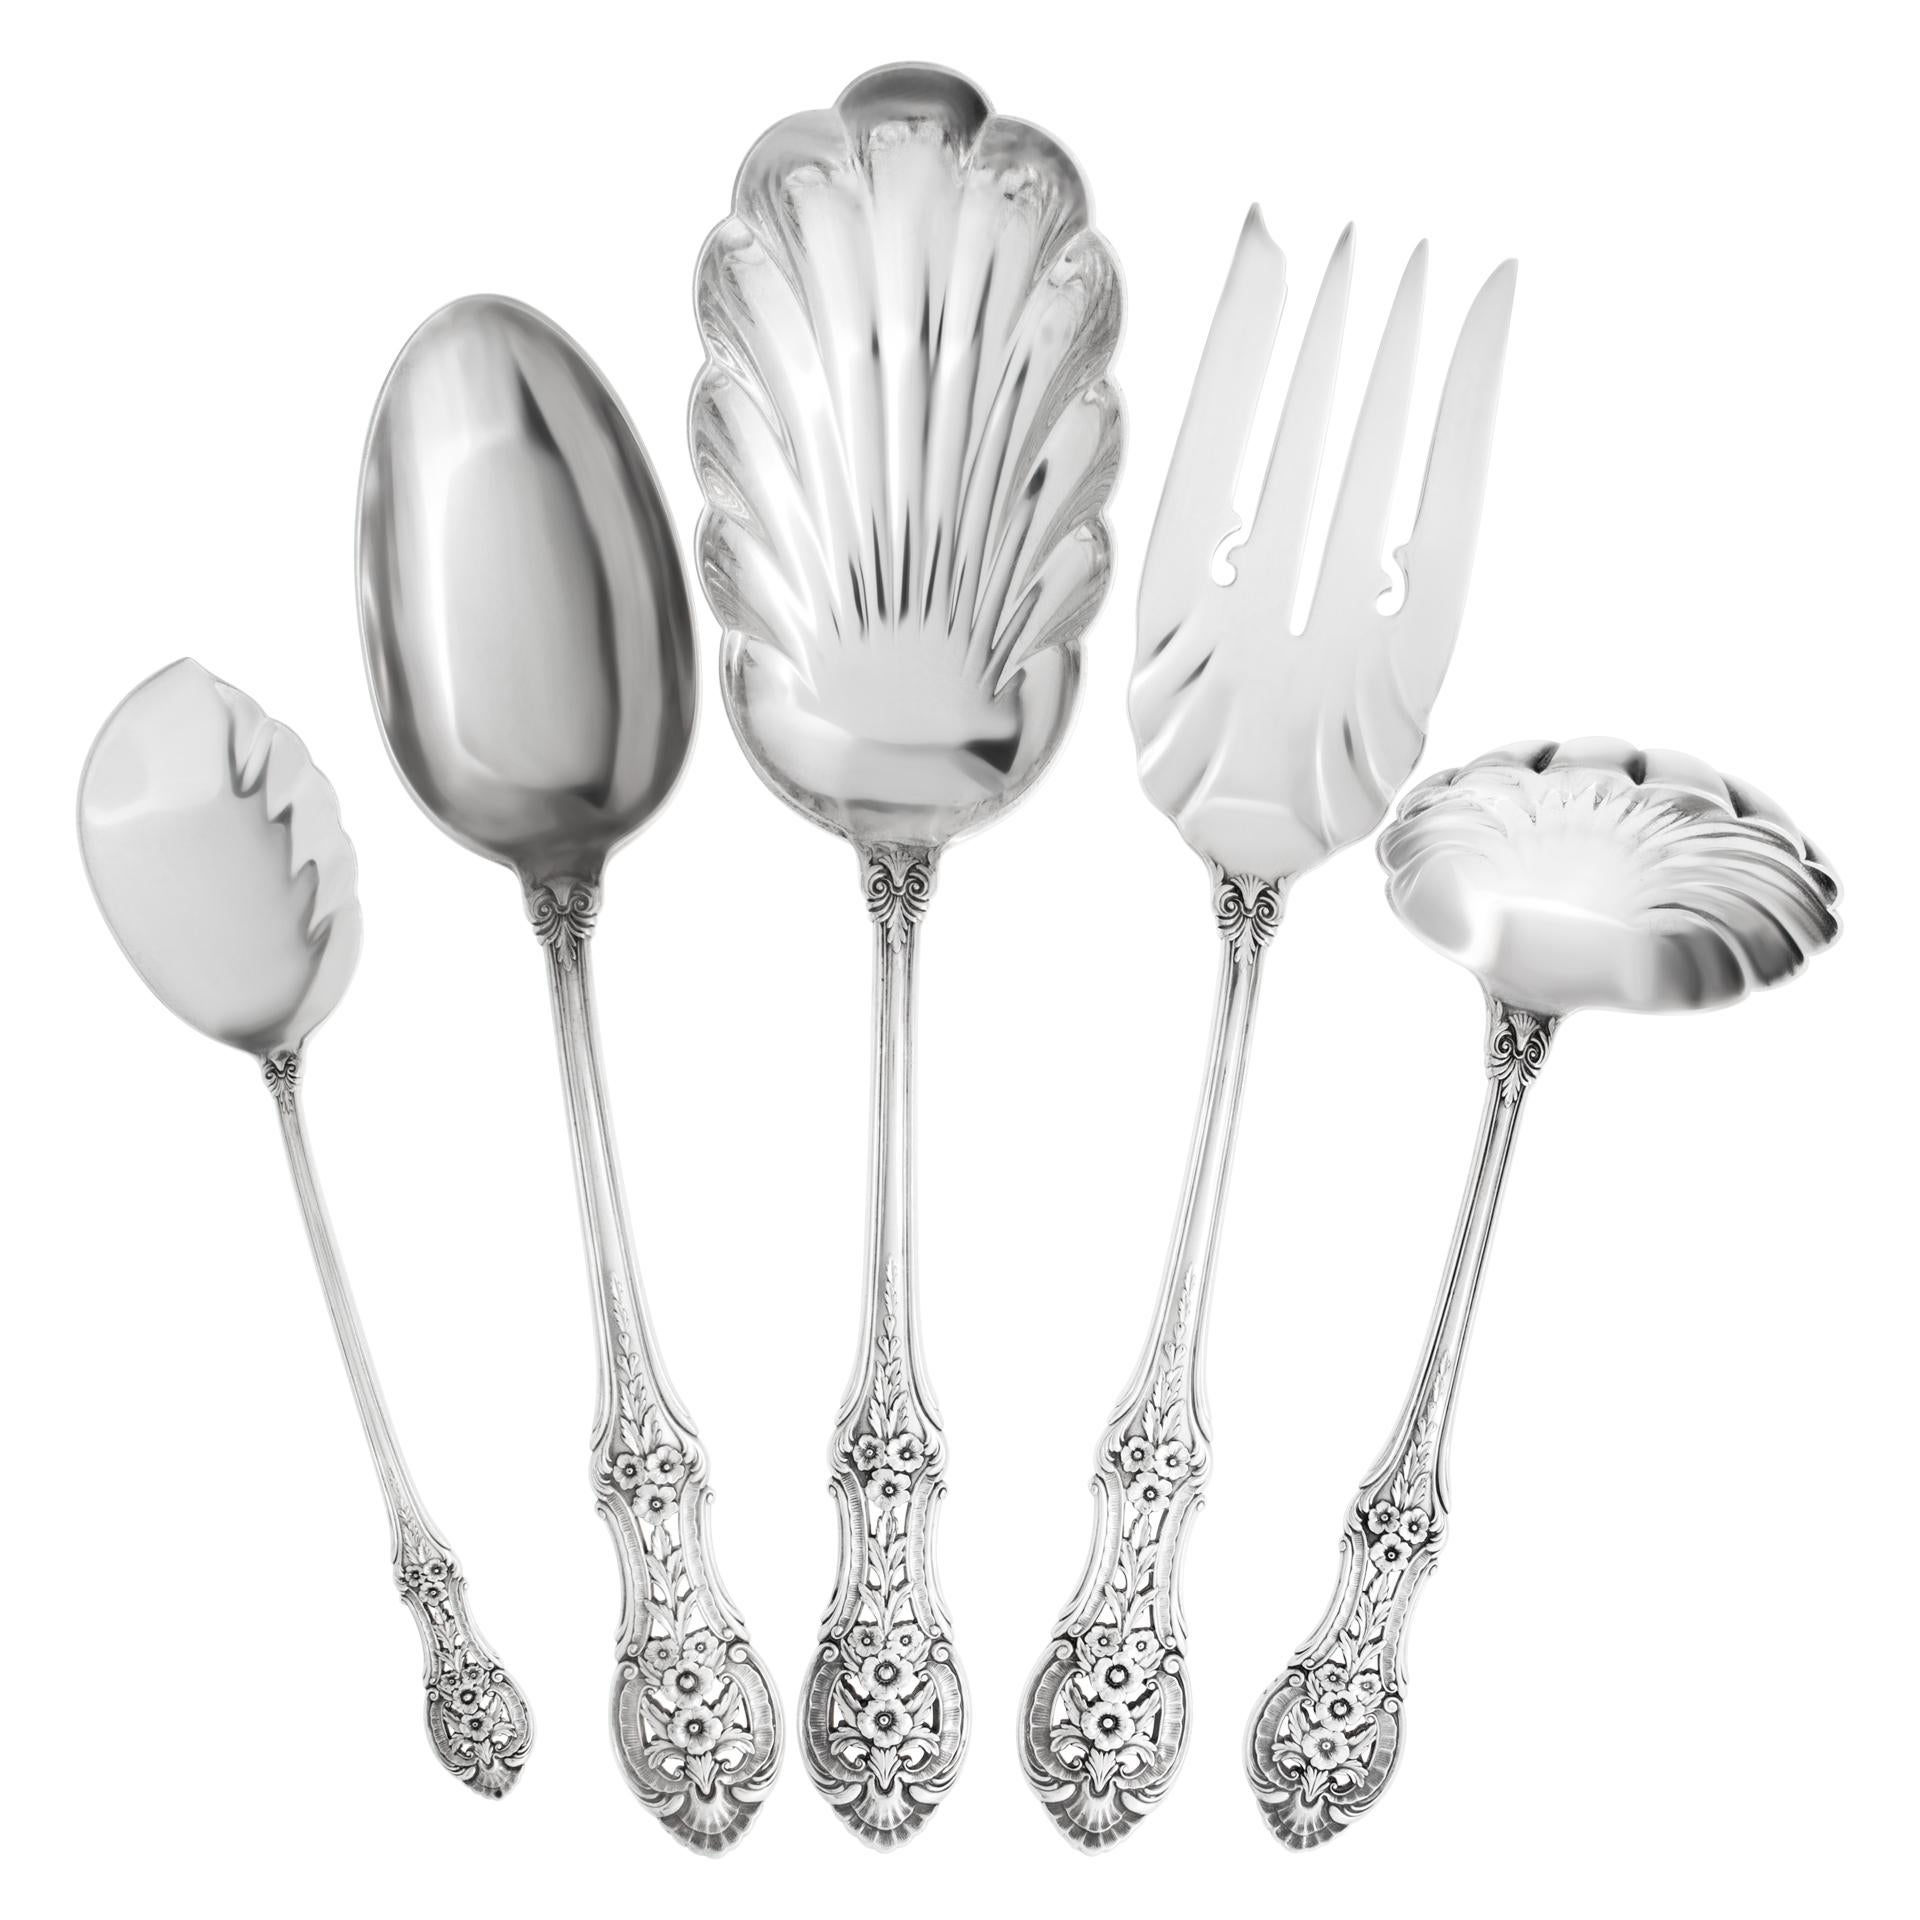 PRIMROSE, sterling silver flatware set by International, patented in 1936. 165 total pieces, dinner & lunch set with 12 serving pieces, 153 troy ounceS of .925 sterling silver, (not counting any of the stainless steel blade pieces). PLACE SETTING: